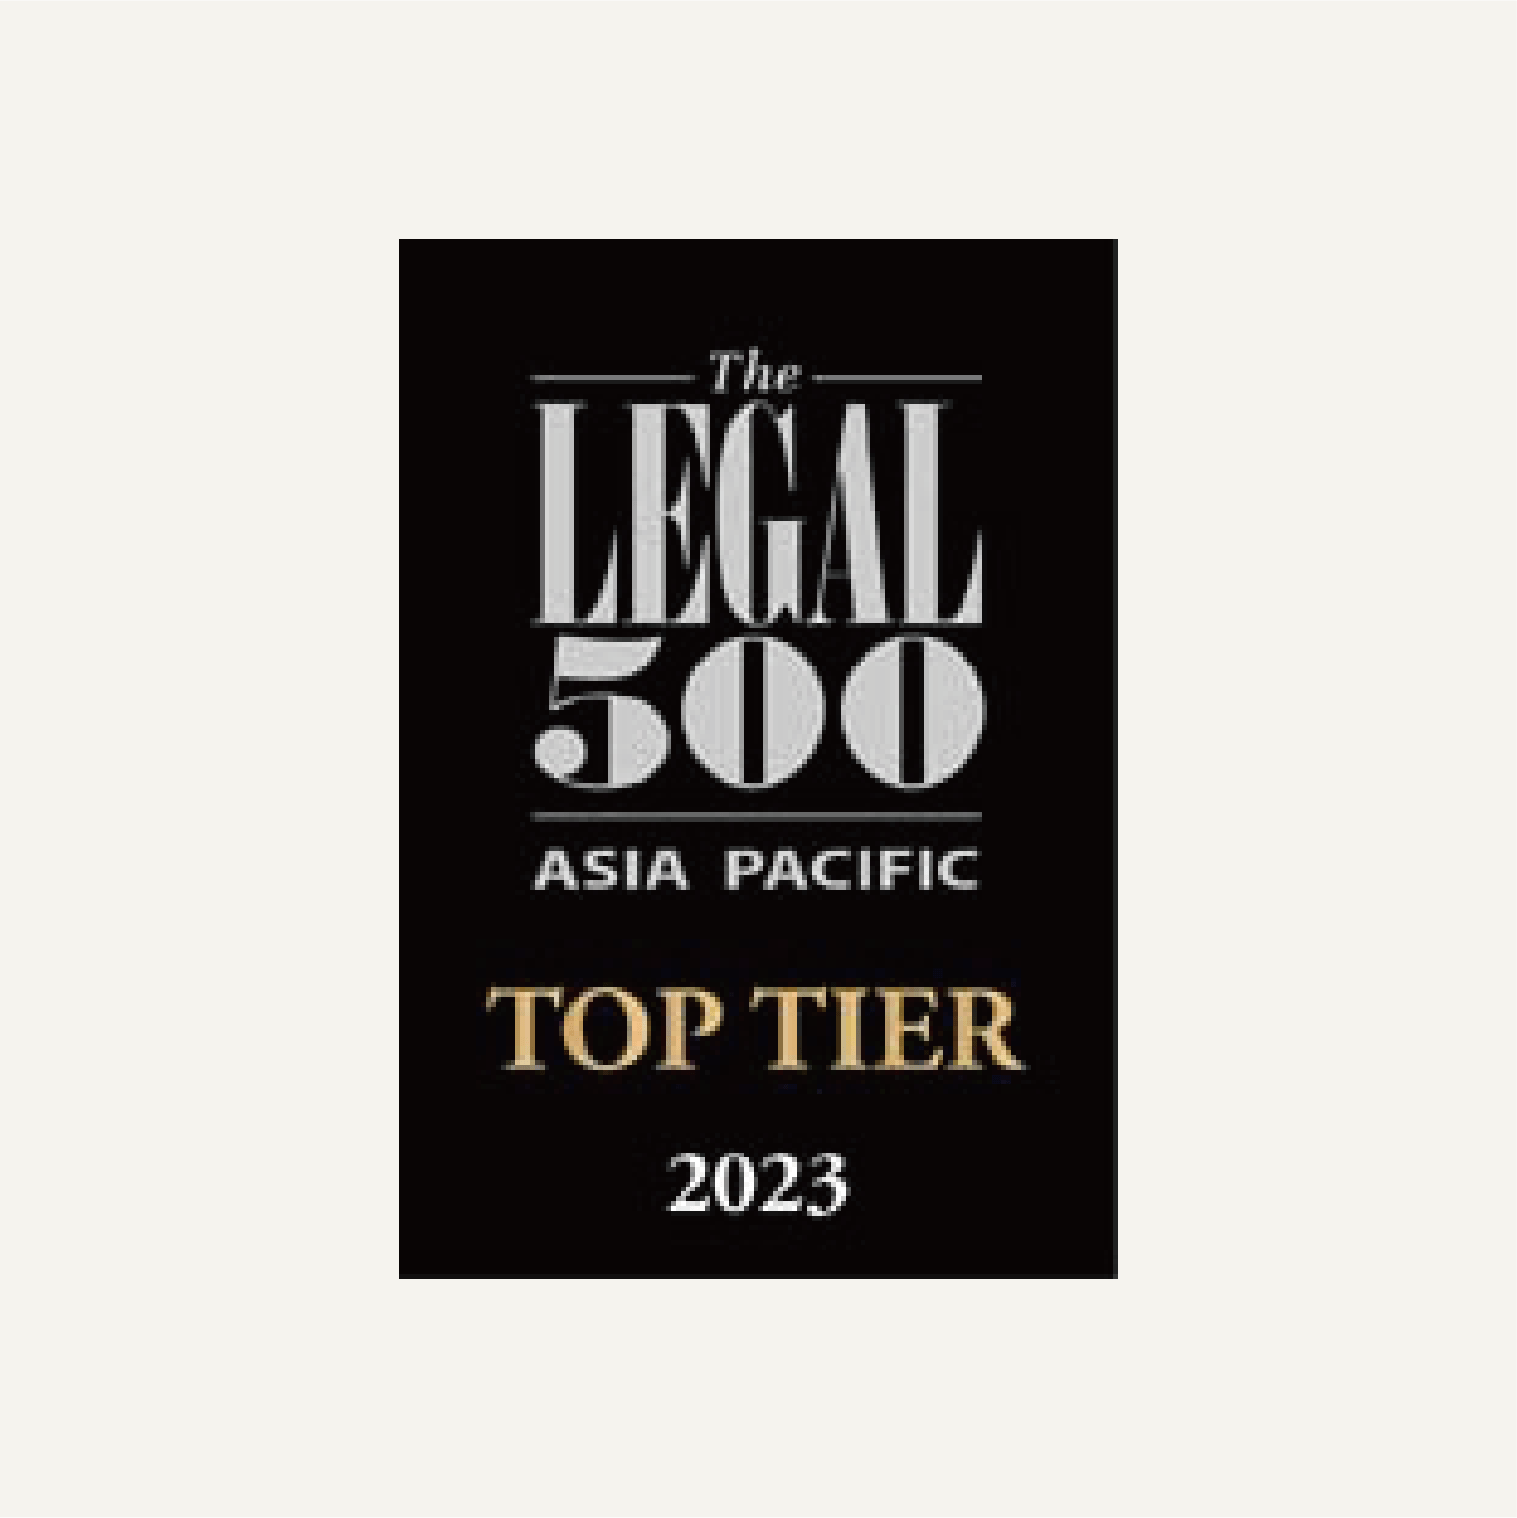 The Legal 500 Asia Pacific Ranking 2023 Edition